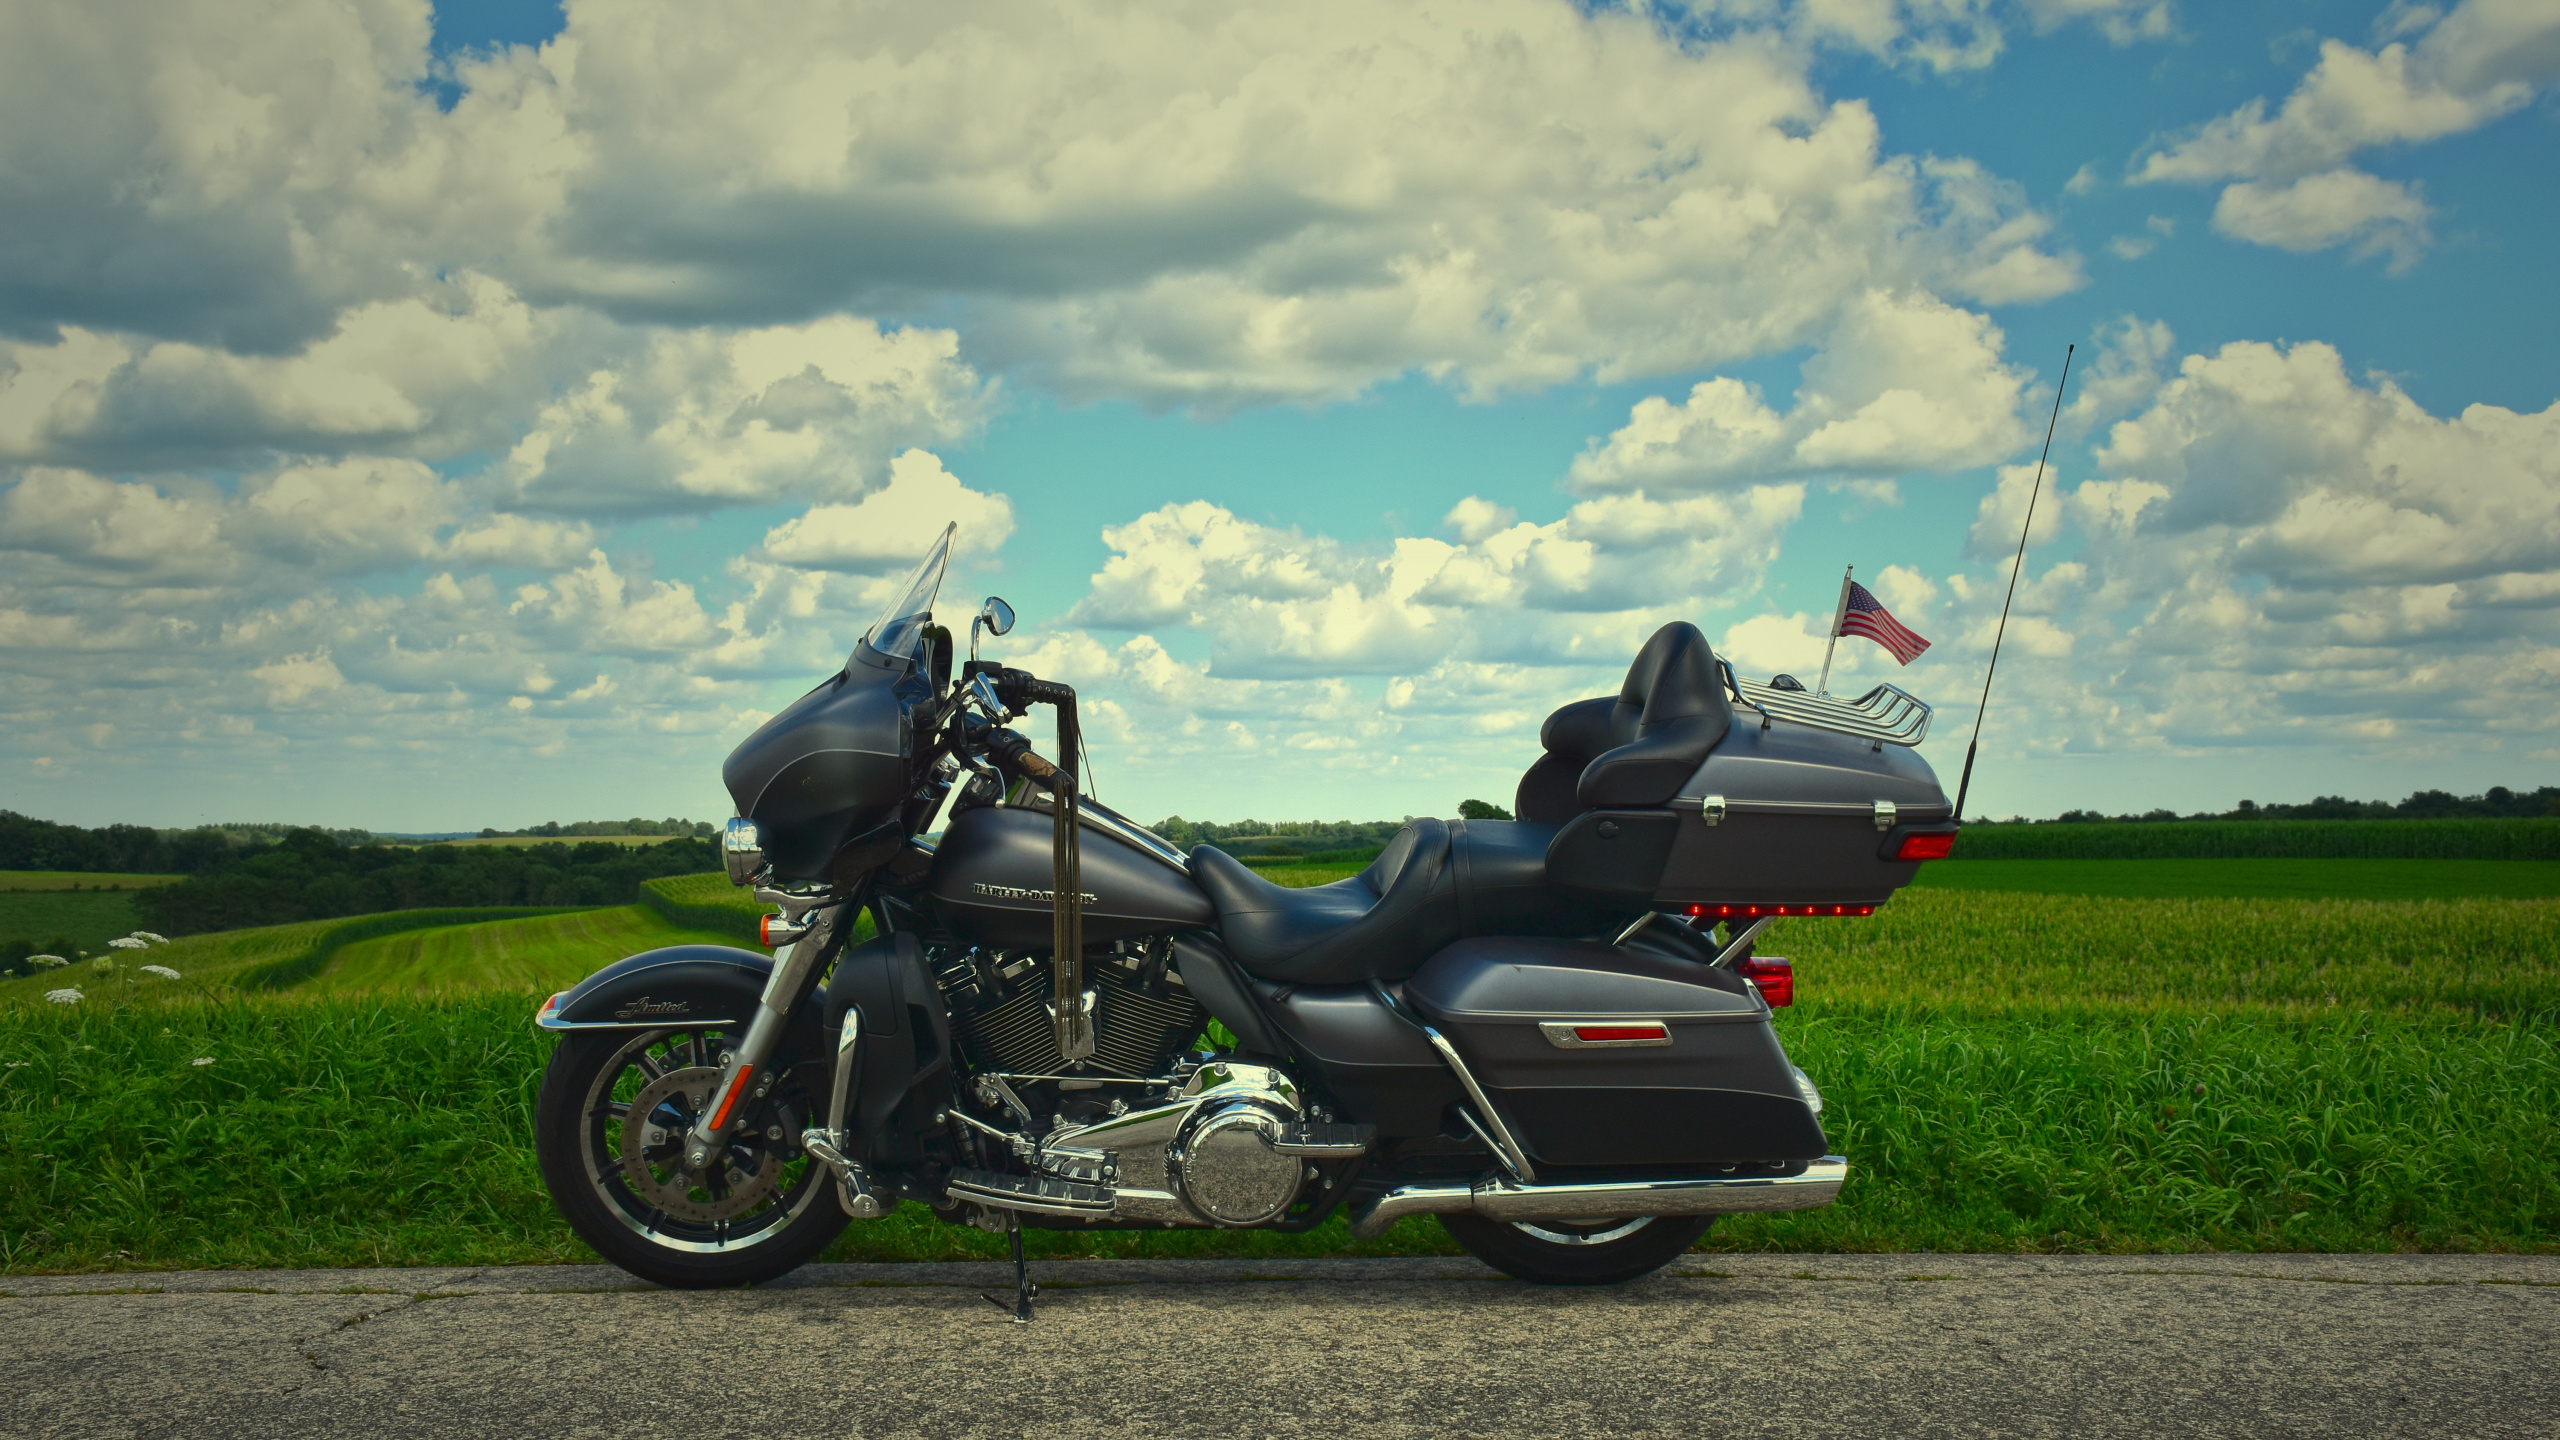 Black and White Sports Bike on Green Grass Field Under White Clouds and Blue Sky During. Wallpaper in 2560x1440 Resolution